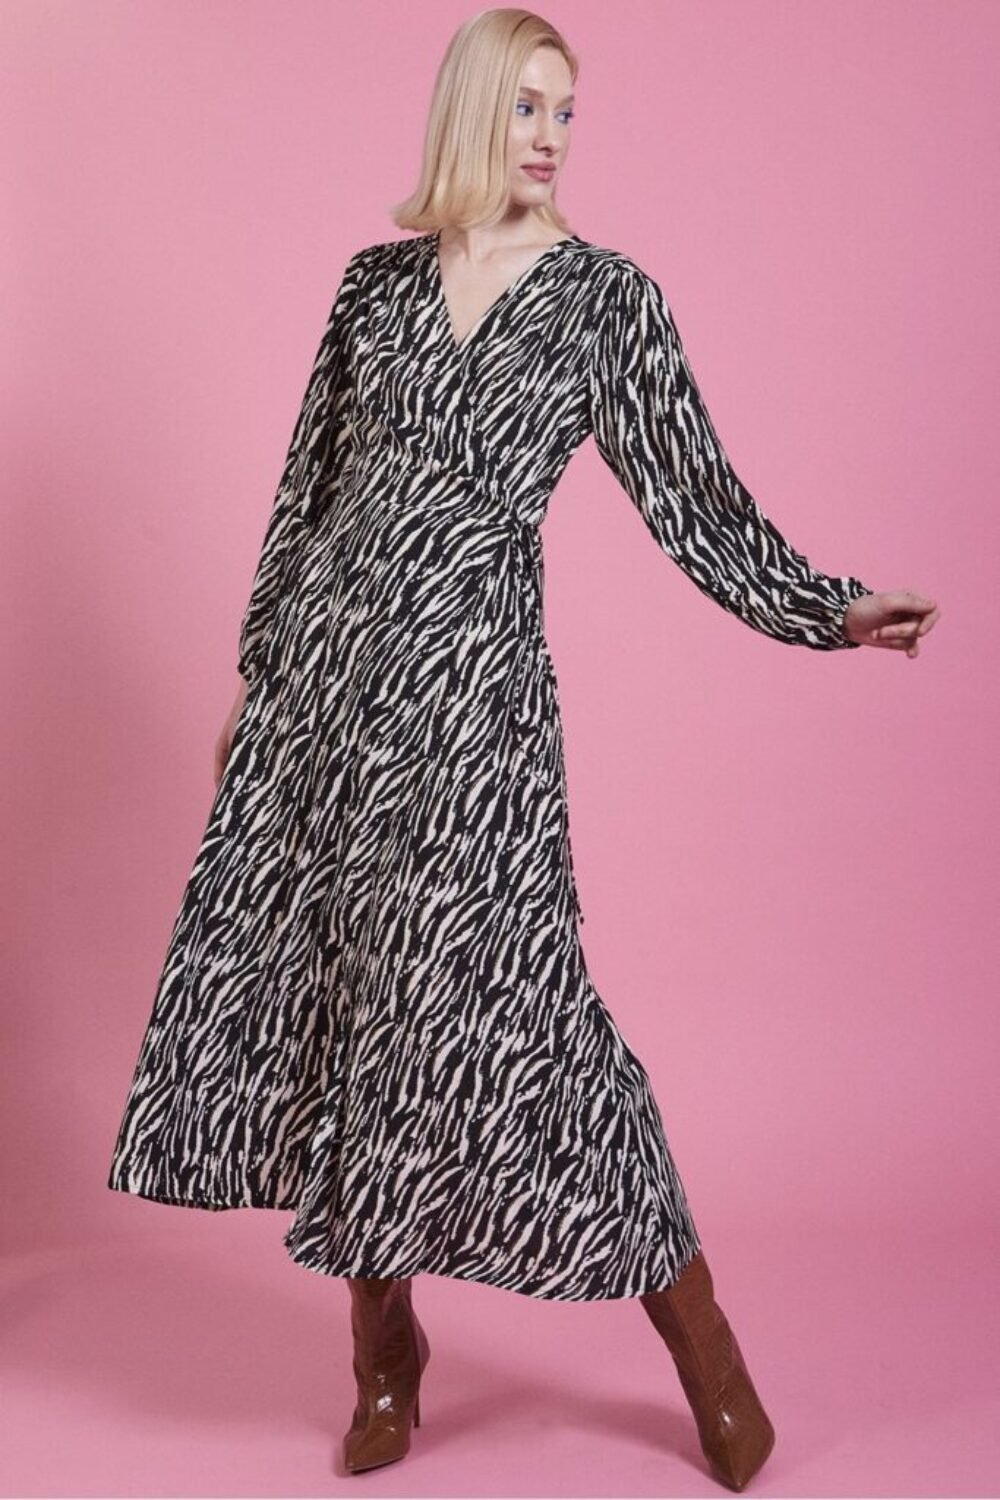 Shop Lux Zebra Print Belted Maxi Dress and women's luxury and designer clothes at www.lux-apparel.co.uk